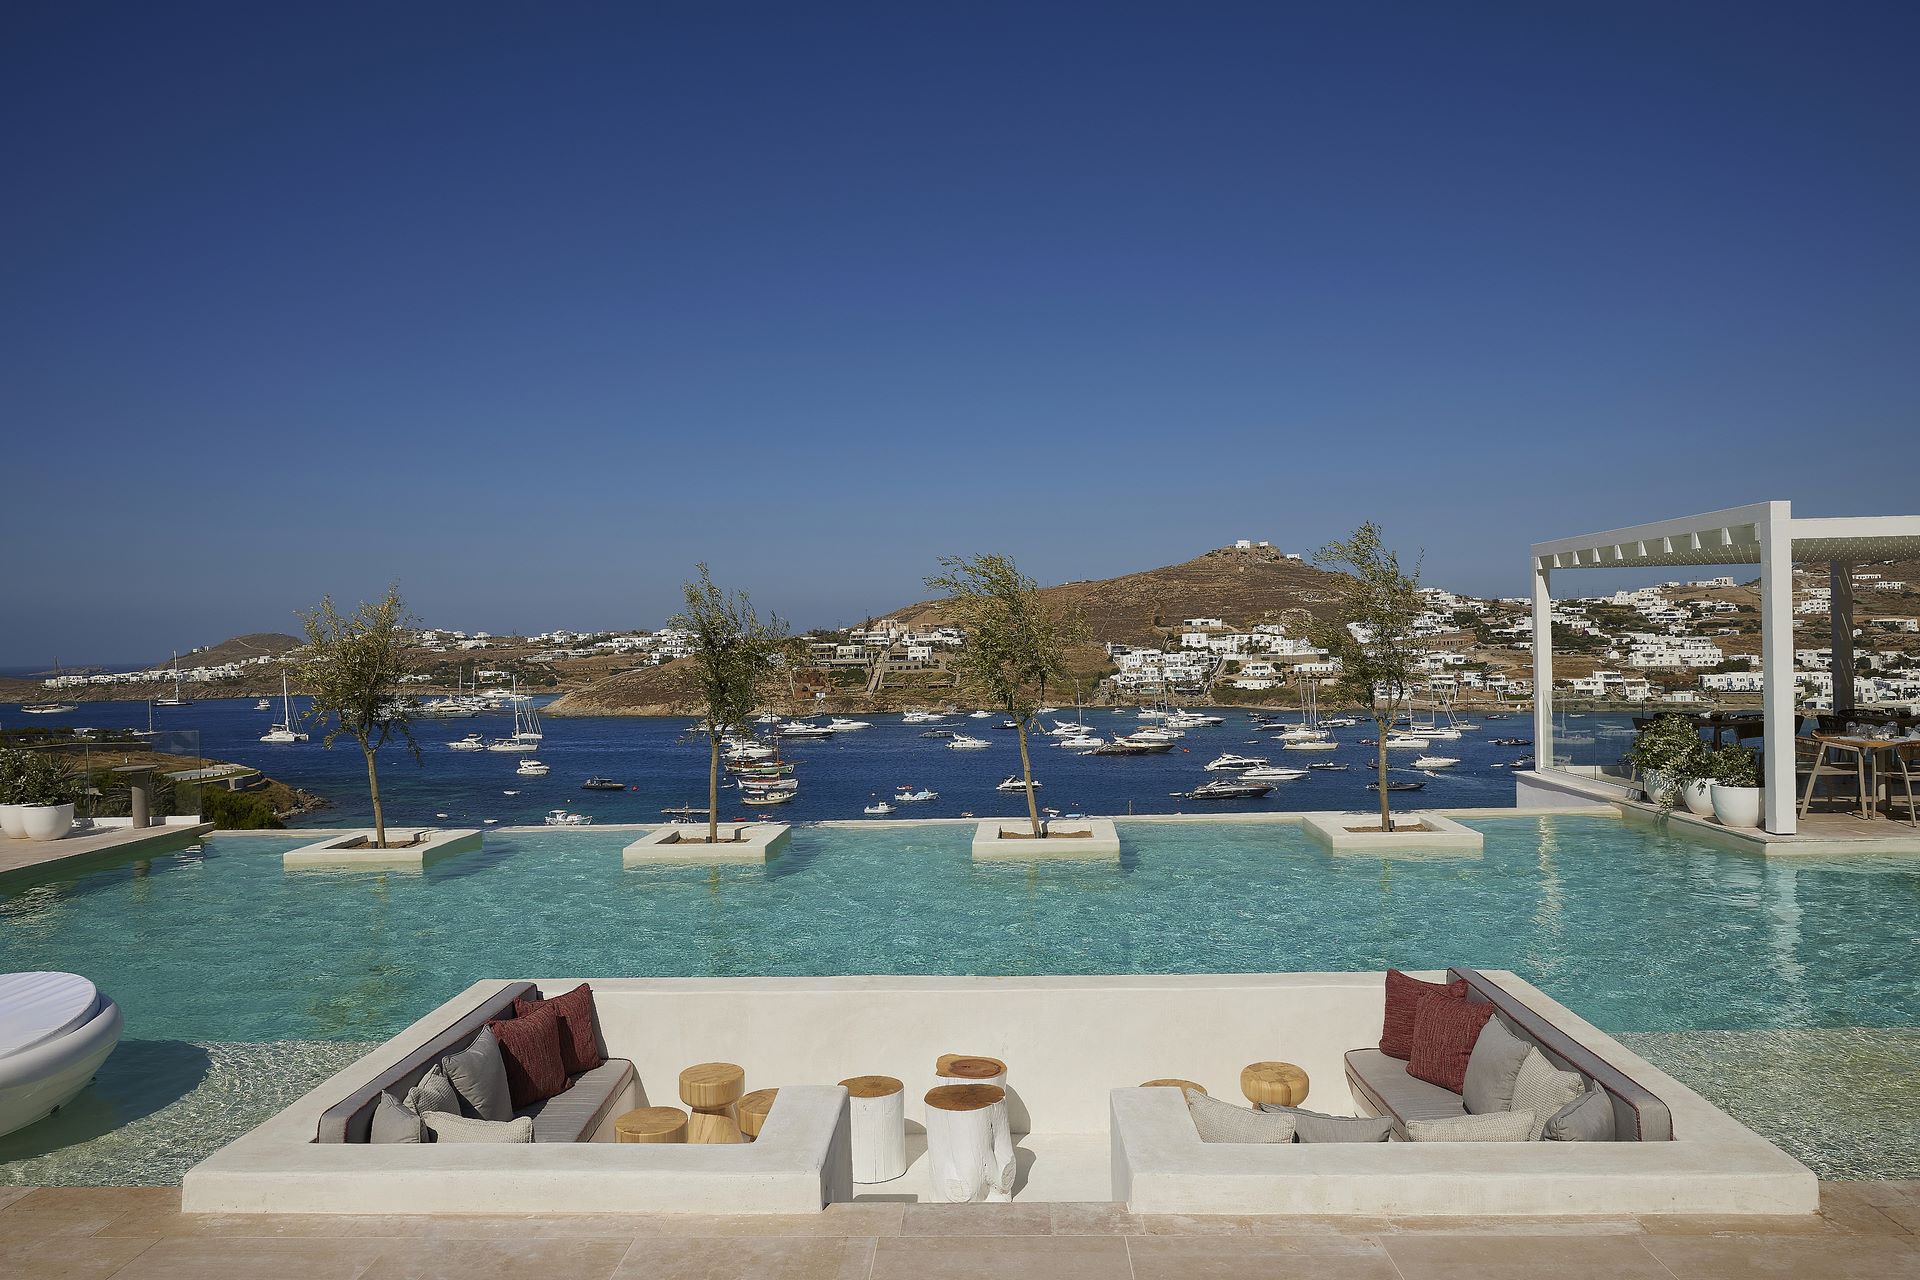 Once in Mykonos, Designed for Adults